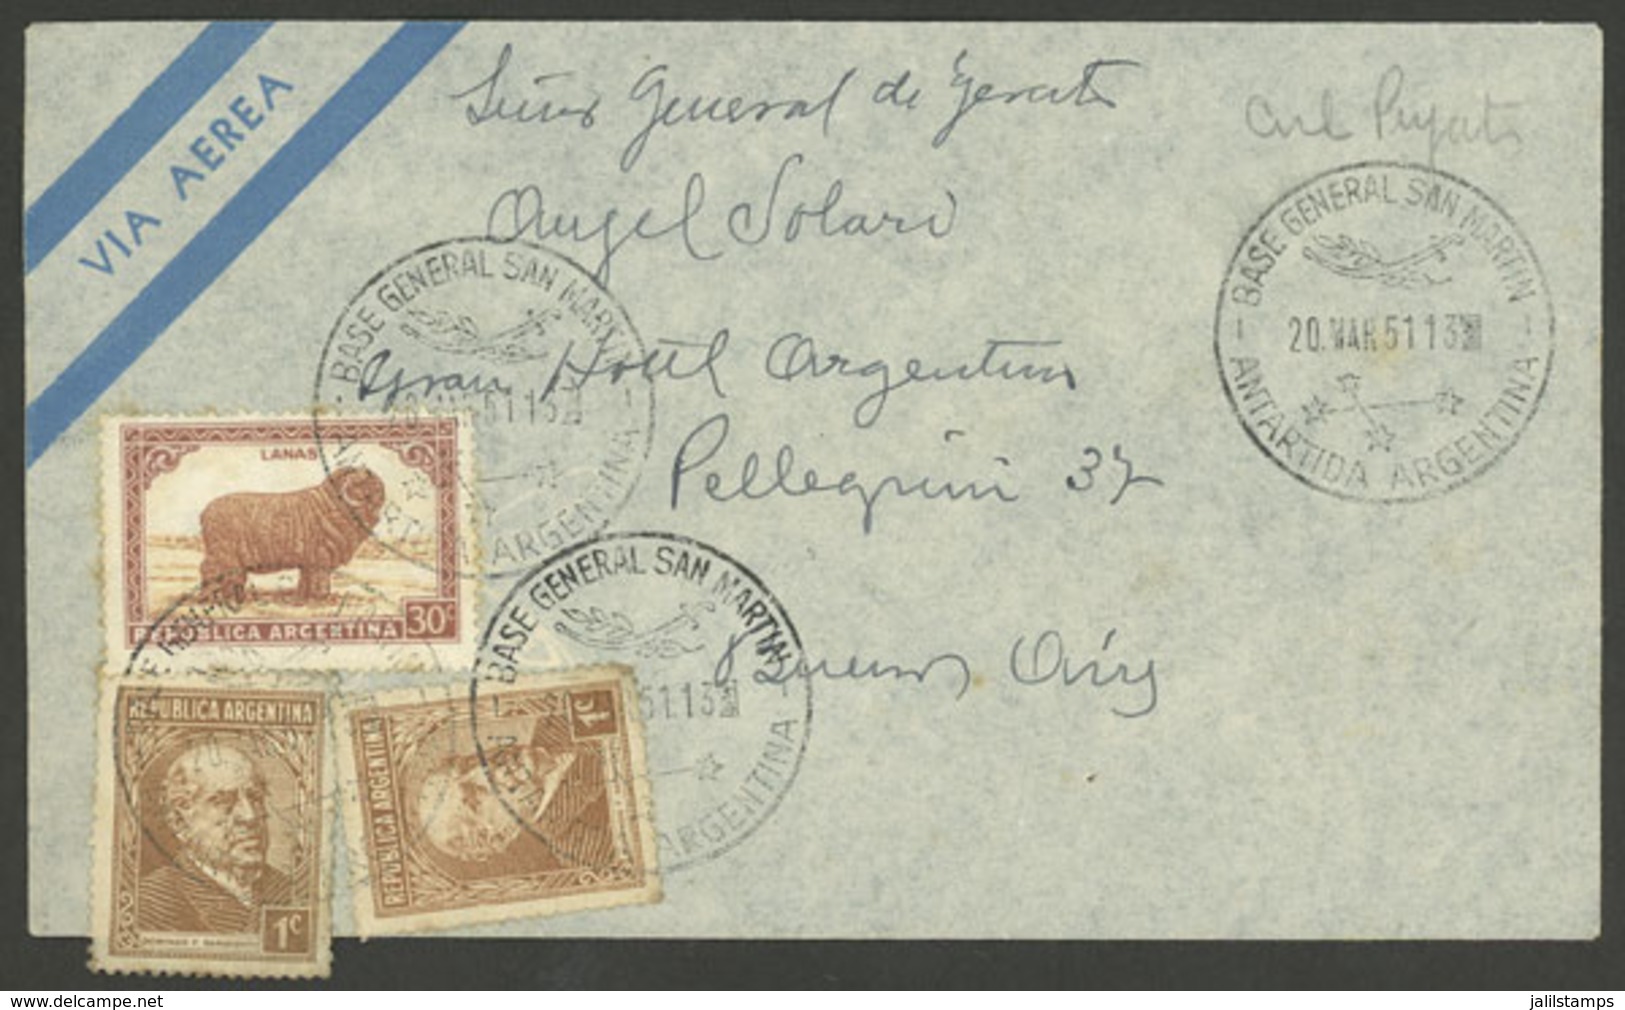 ARGENTINE ANTARCTICA: Airmail Cover Sent To Buenos Aires On 20/MAR/1951 Franked With 32c., Datestamped In GRAL. SAN MART - Briefe U. Dokumente